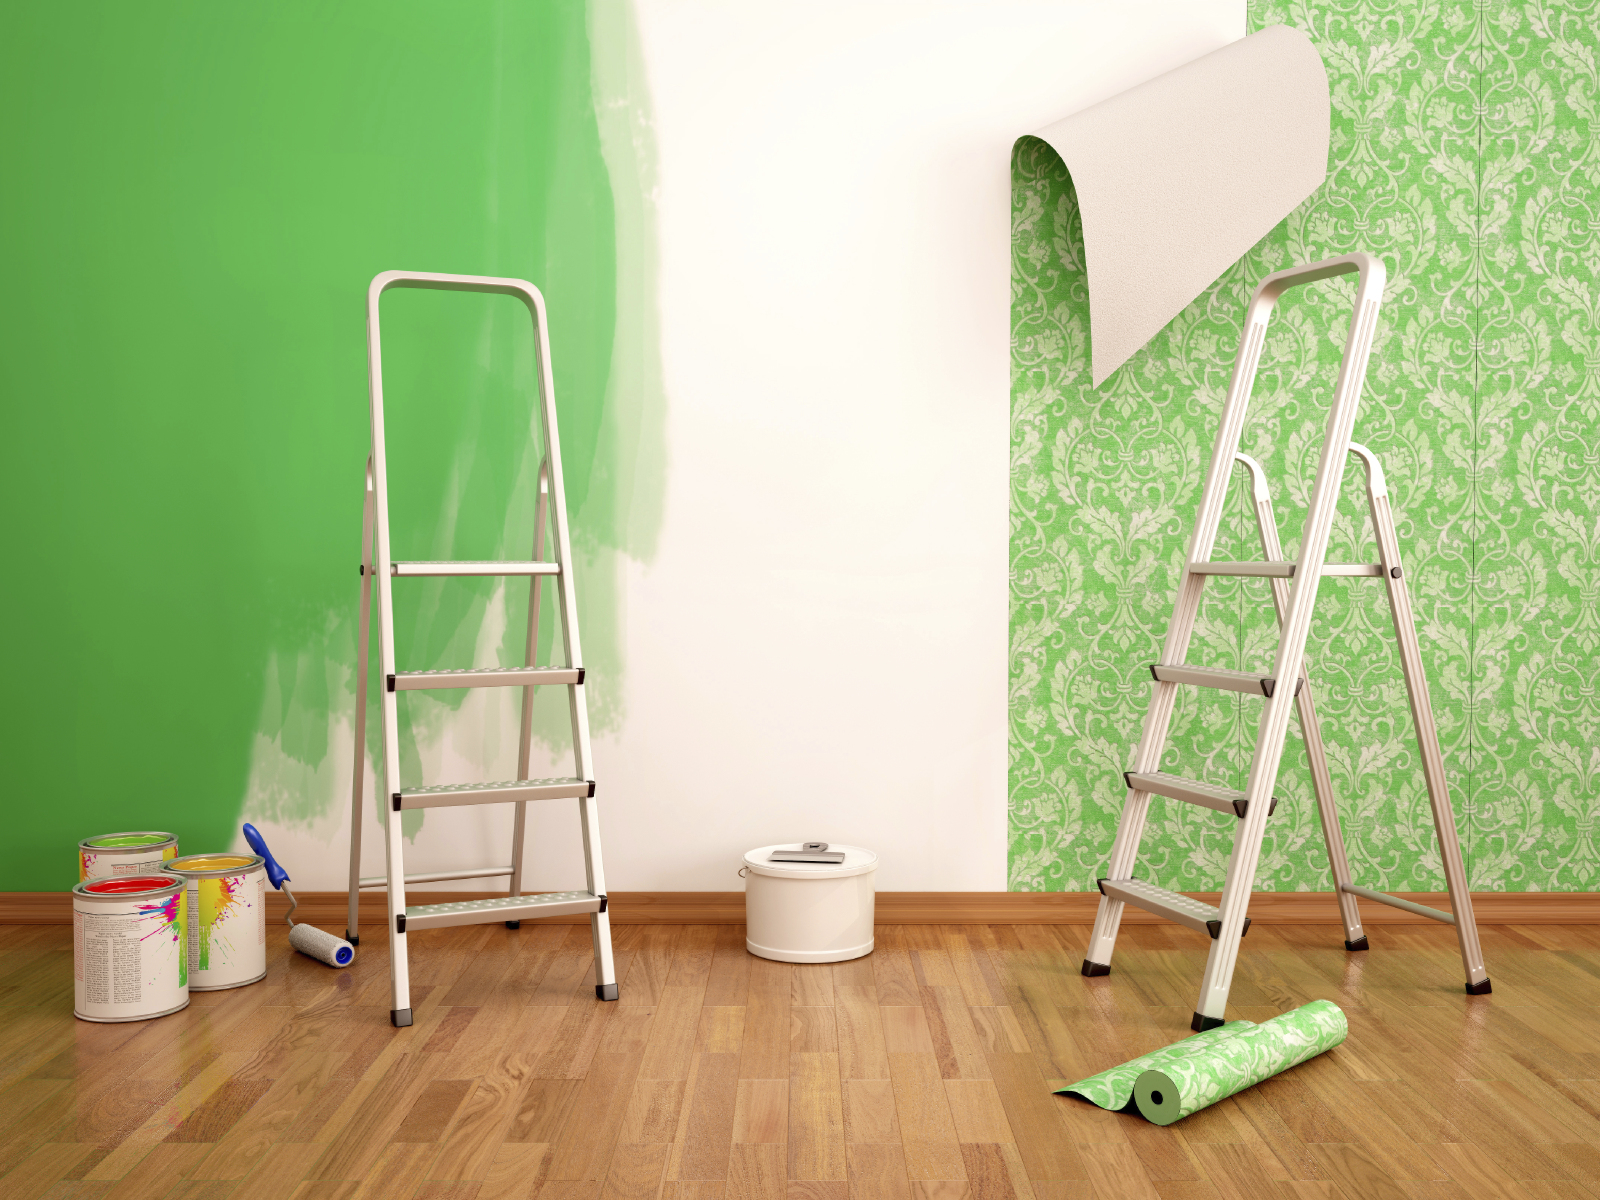 Stock photo of a room renovation